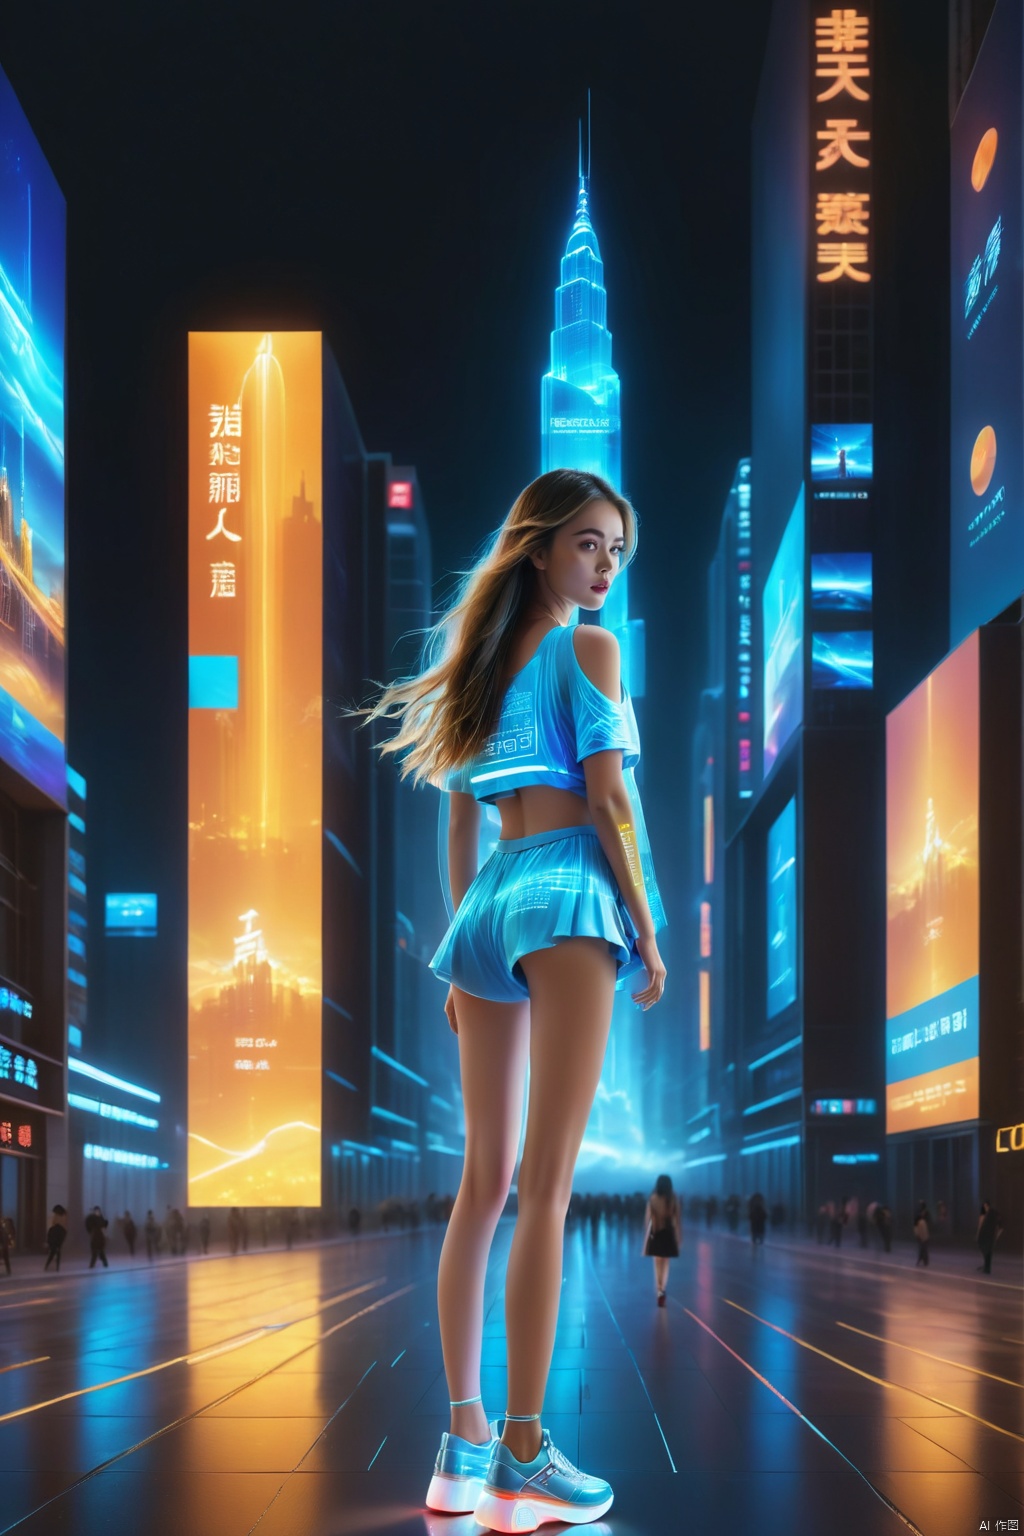 1 girl, long hair, neon light, (full body), night, city street, blue_dress, luminous text on the body, multi-line light on the body, (luminous electronic screen),(electronic message flow: 1.3), holographic projection, (luminous electronic screen on the arm: 1.2), luminous text on the thigh, (girl pose: 1.3), luminous electronic shoes, (Masterpiece, best quality: 1.2),16k, horizontal image quality, (luminous electronic screen), electronic message flow, holographic projection,, luminous electronic shoes, city blocks, skyscrapers, scenery